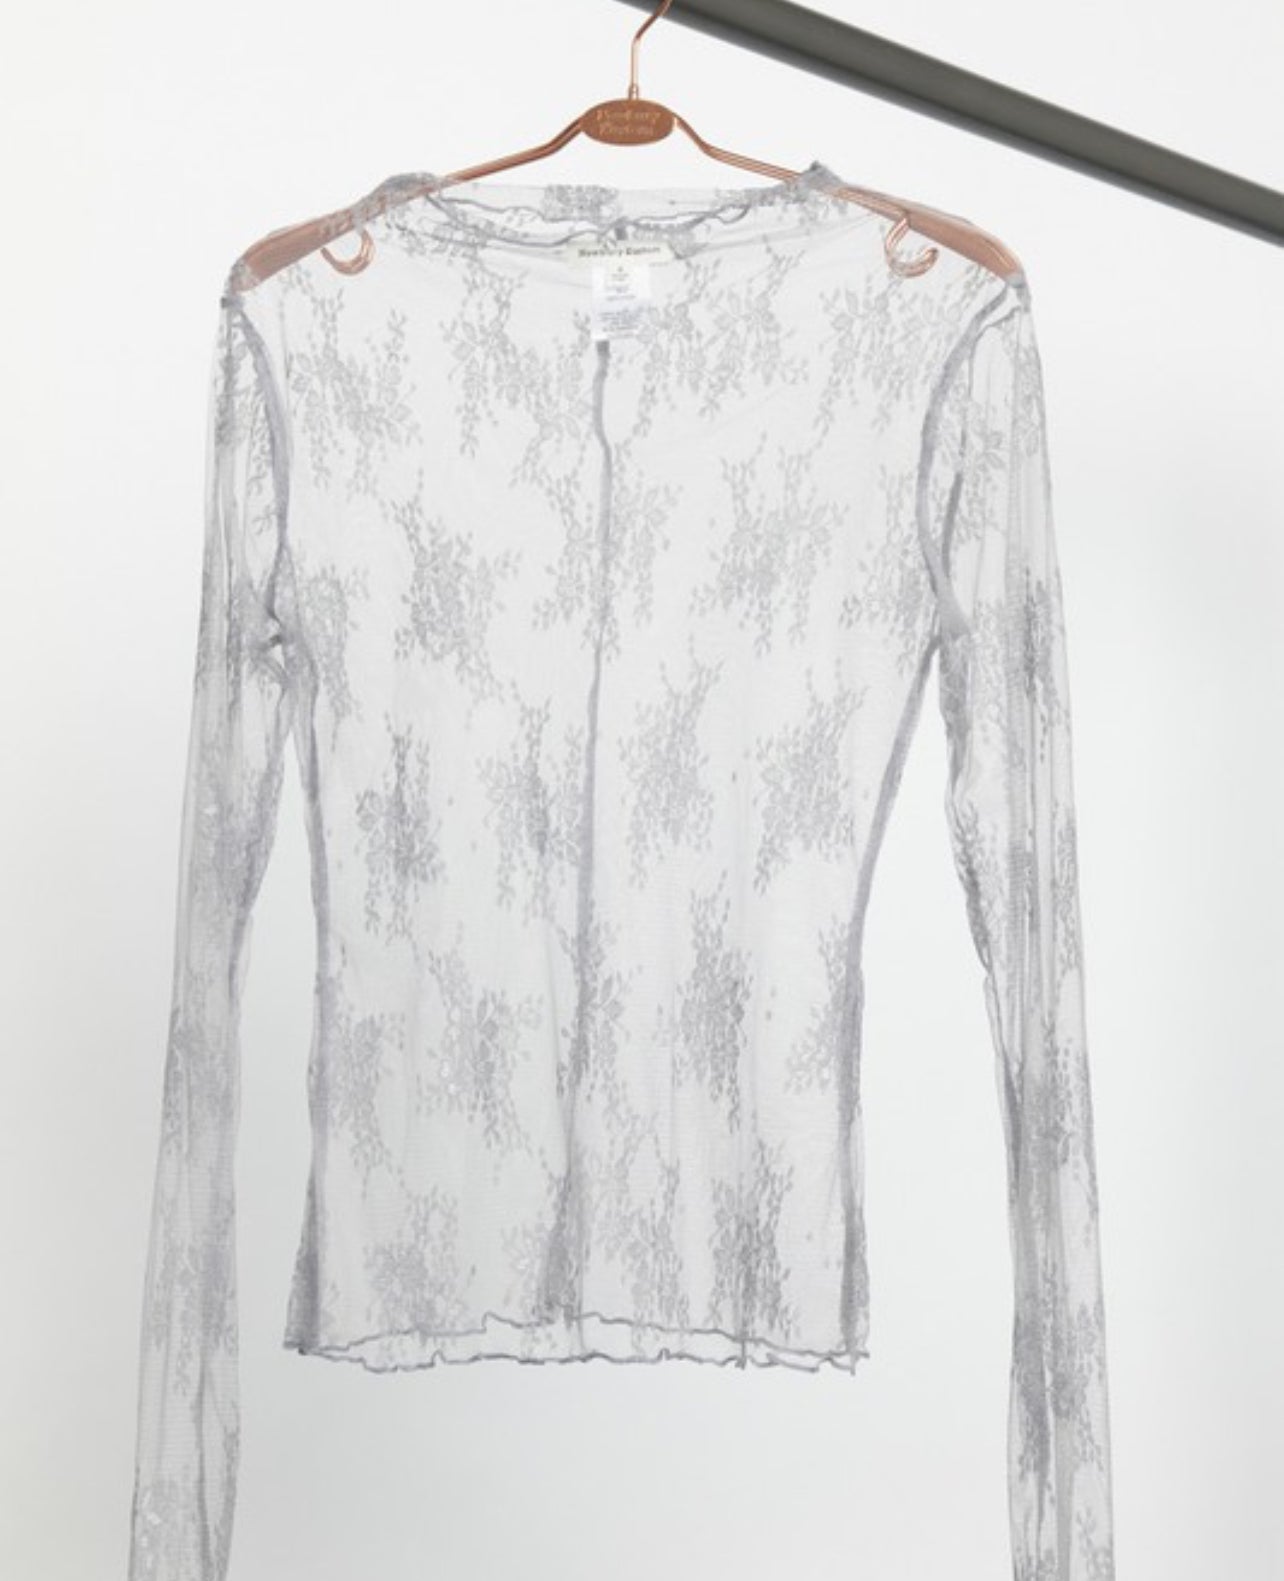 FLORAL EMBROIDERY MESH TOP